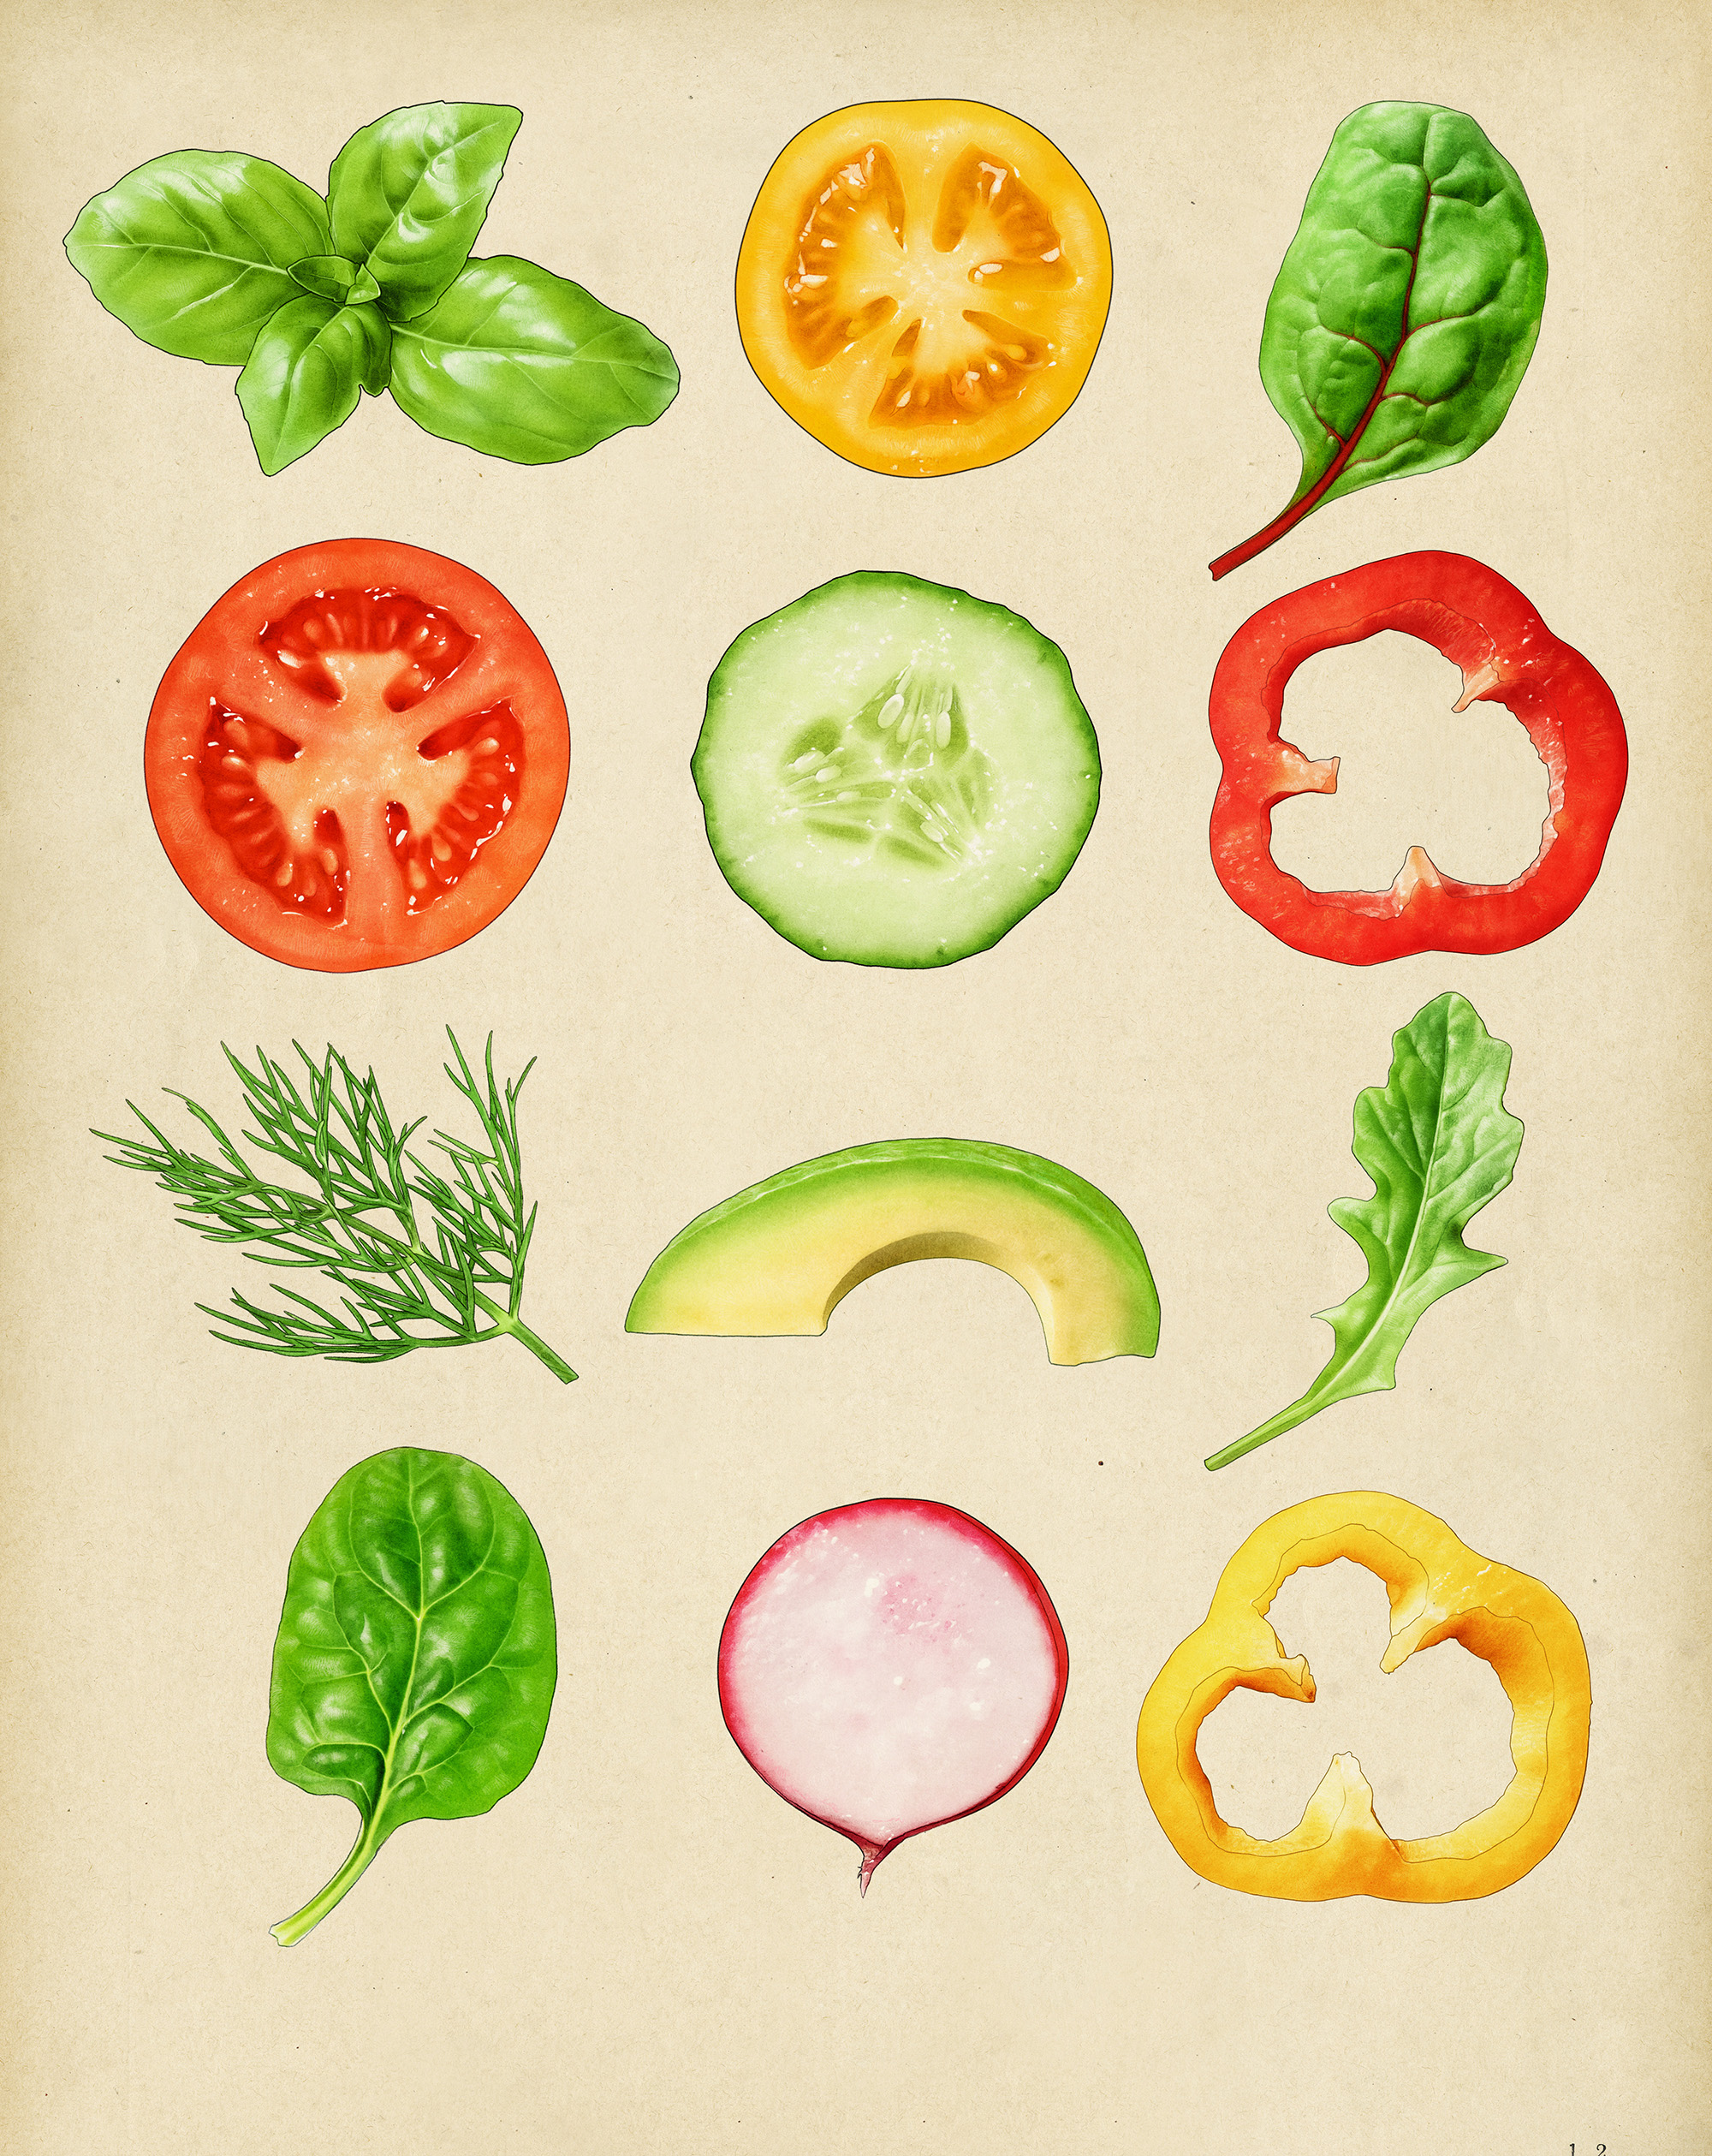 vegetable illustrations for sandwich packaging Parsons spreads with chard dill spinach tomato radish pepper avocado cucumber basil